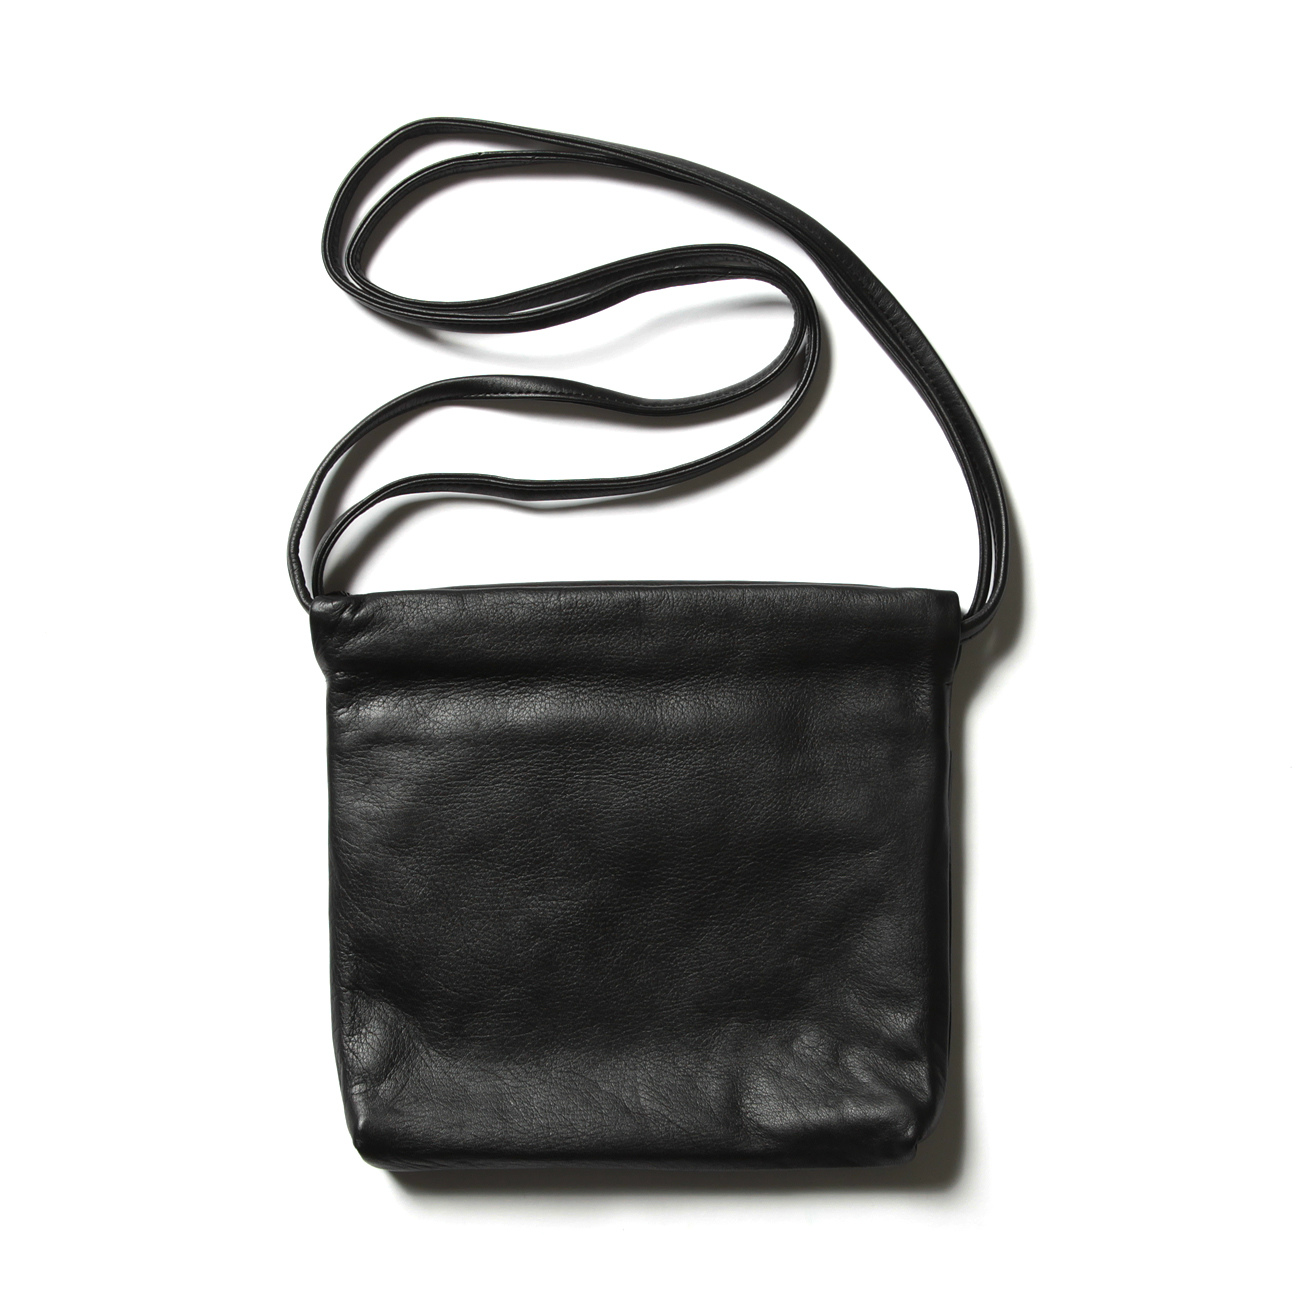 LEATHER POUCH - Black